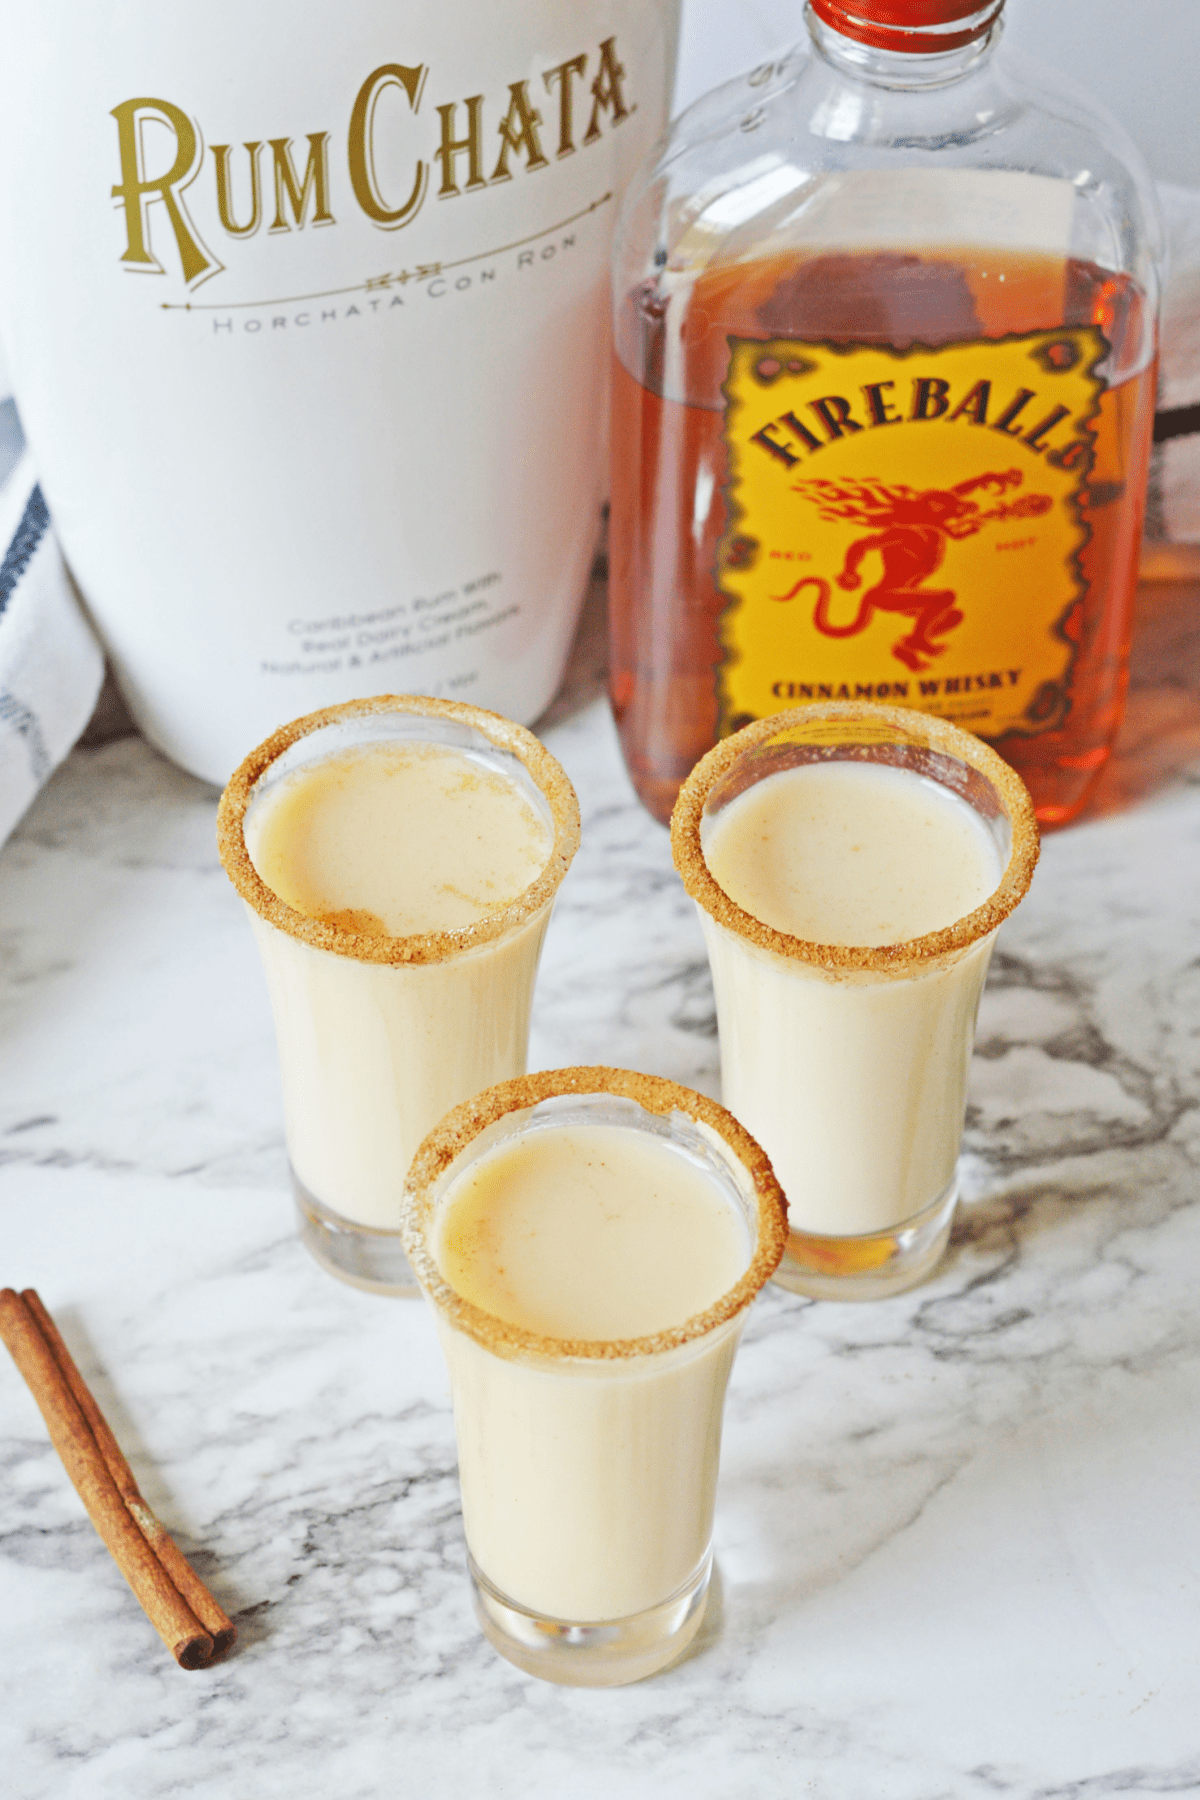 Cinnamon Toast Crunch shots with alcohol bottles